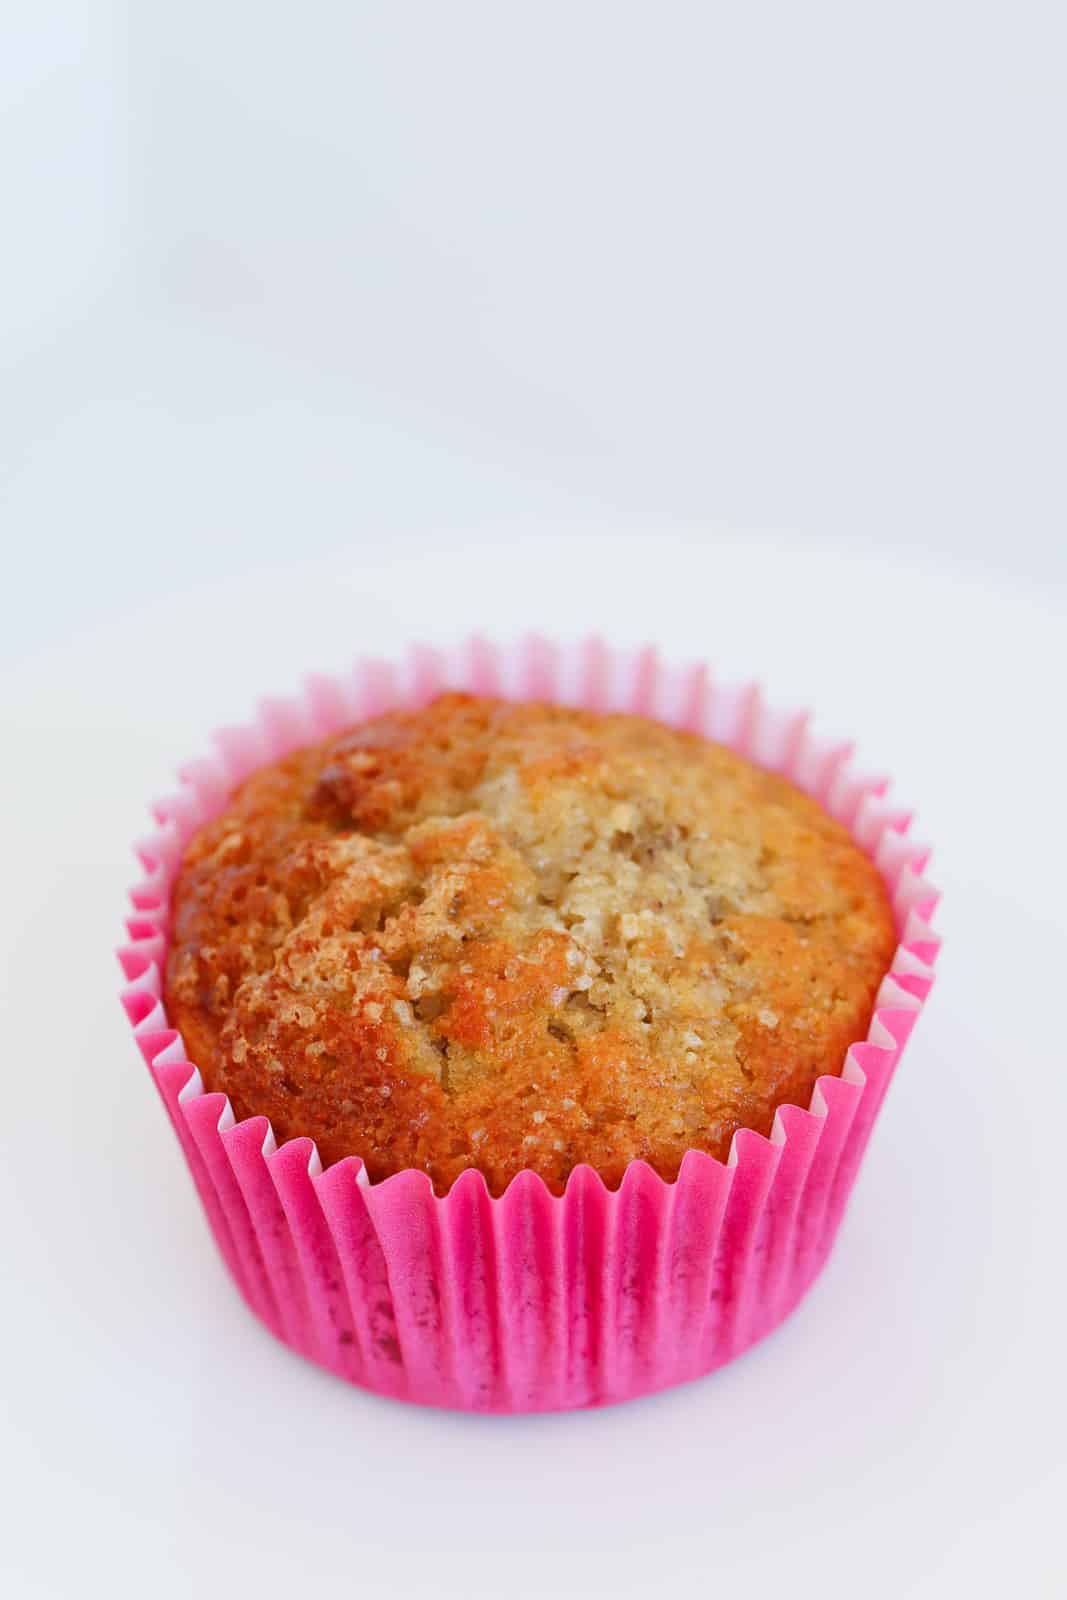 A banana muffin with choc chips.